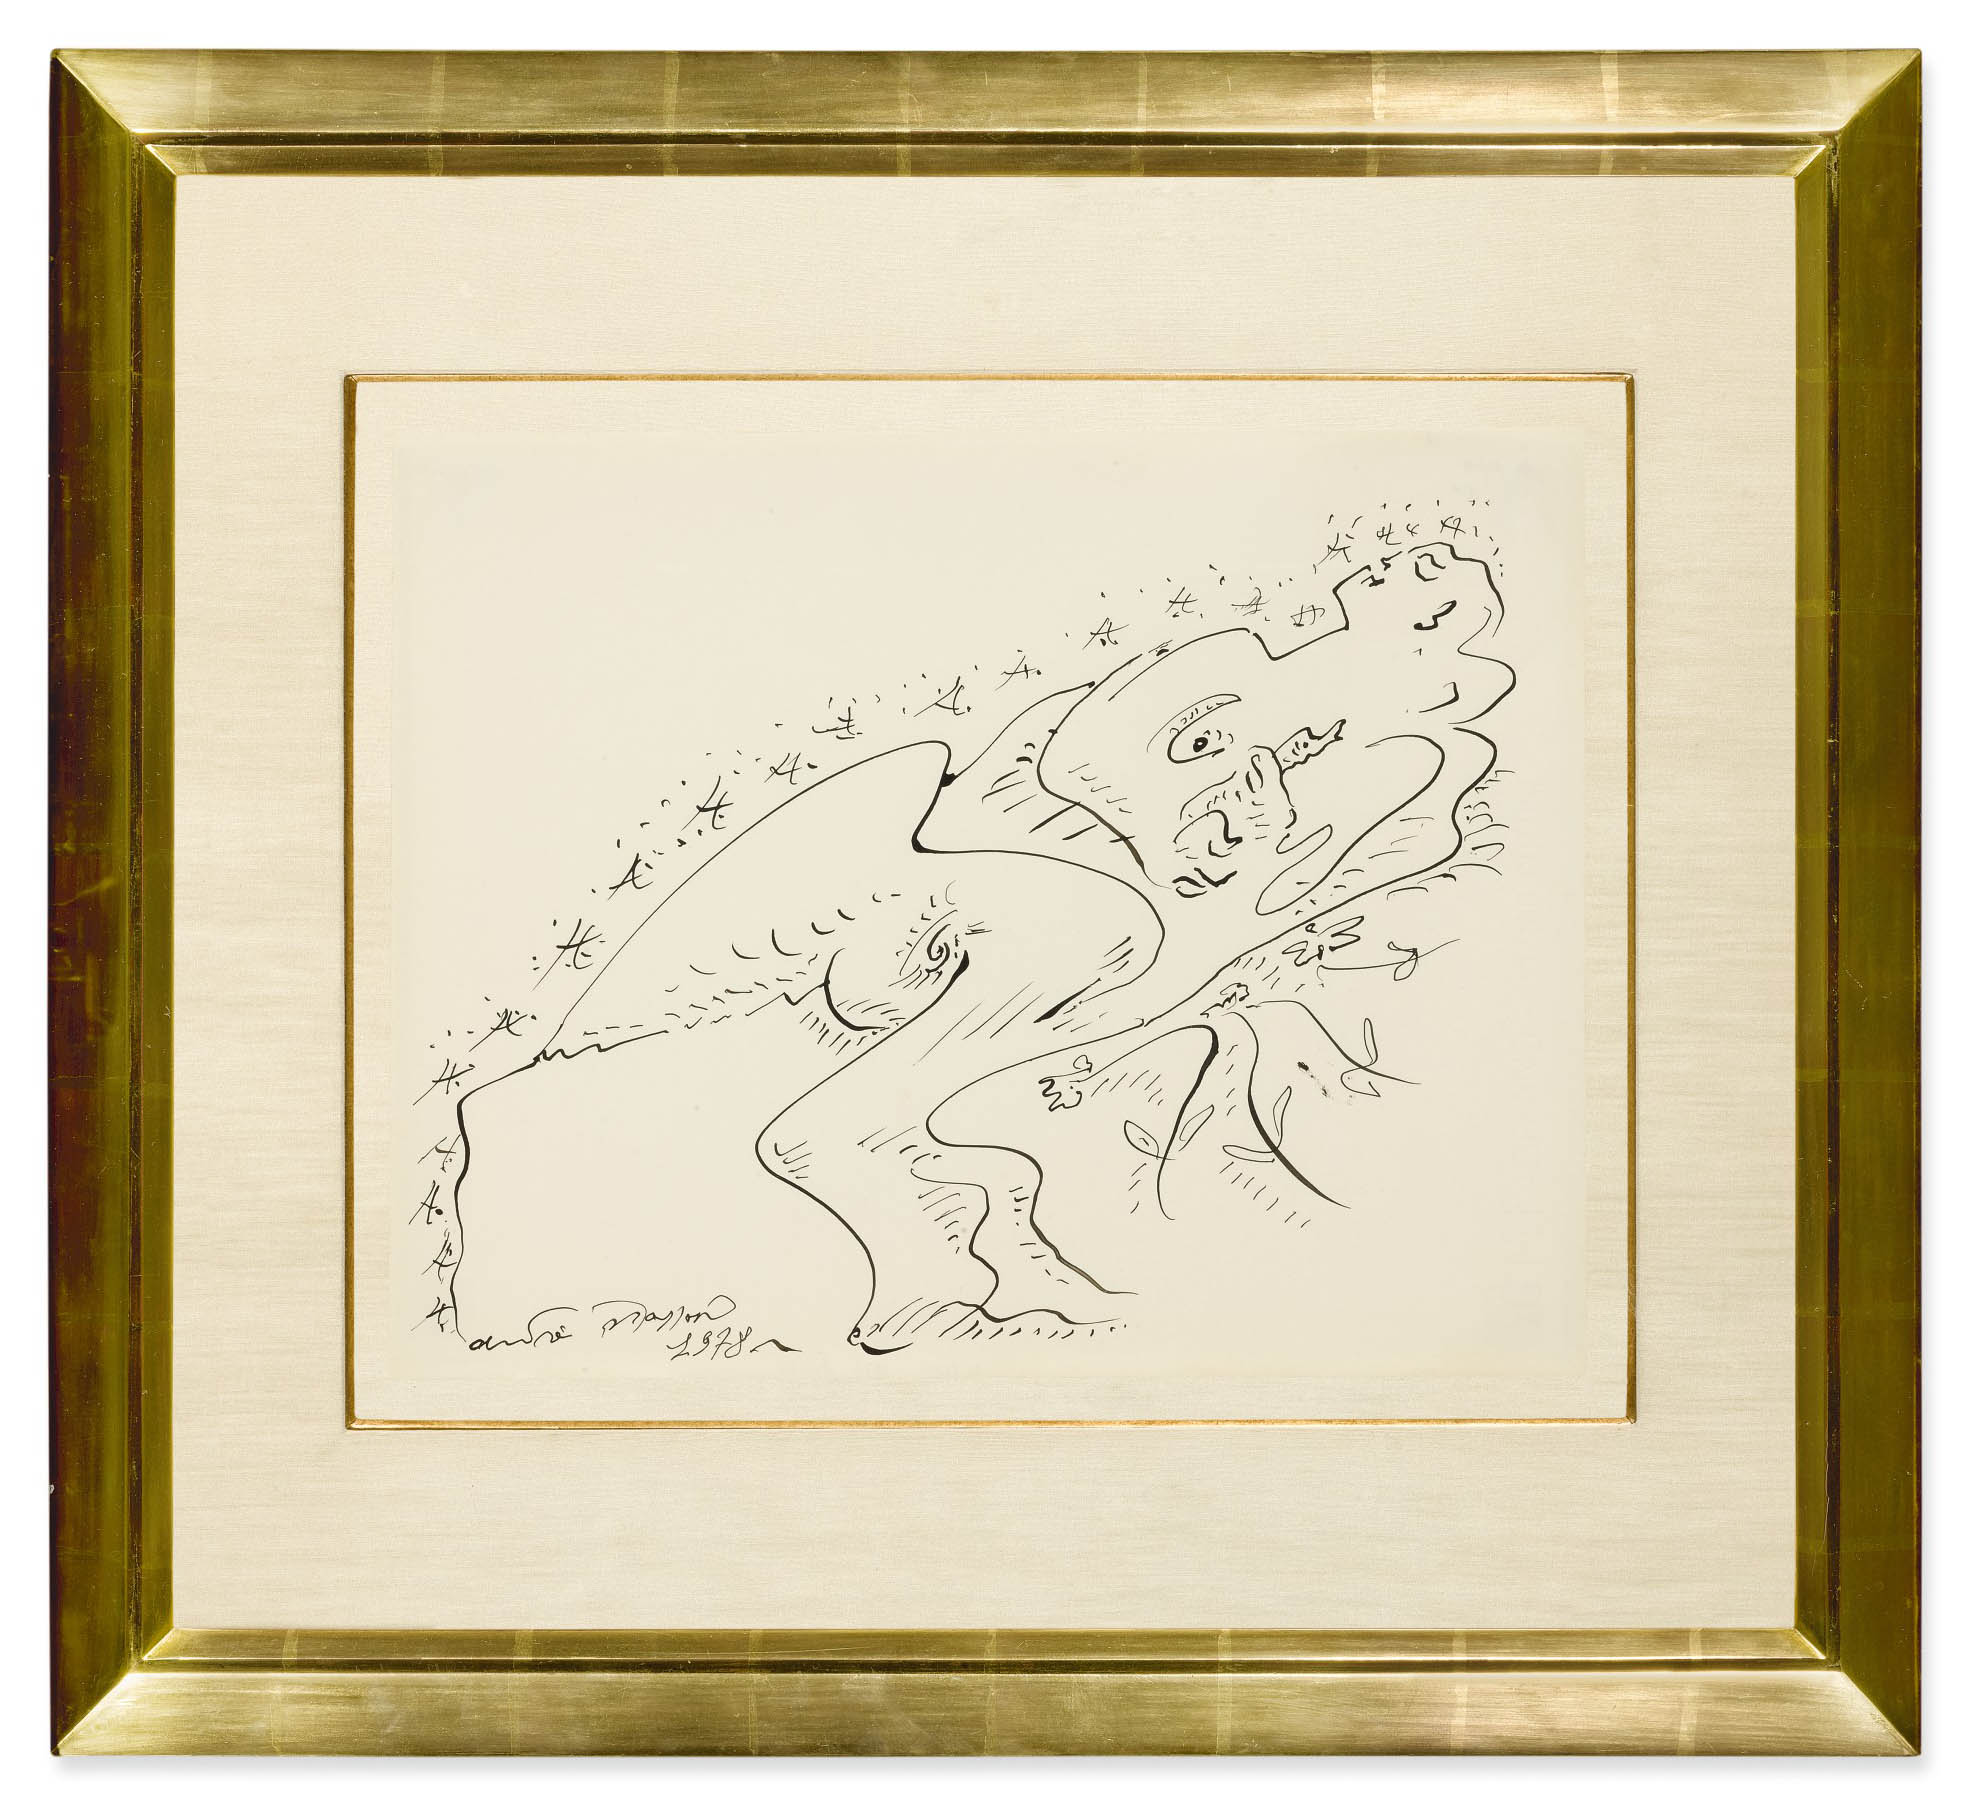 Andre Masson - Le Repos - 1978 ink on paper